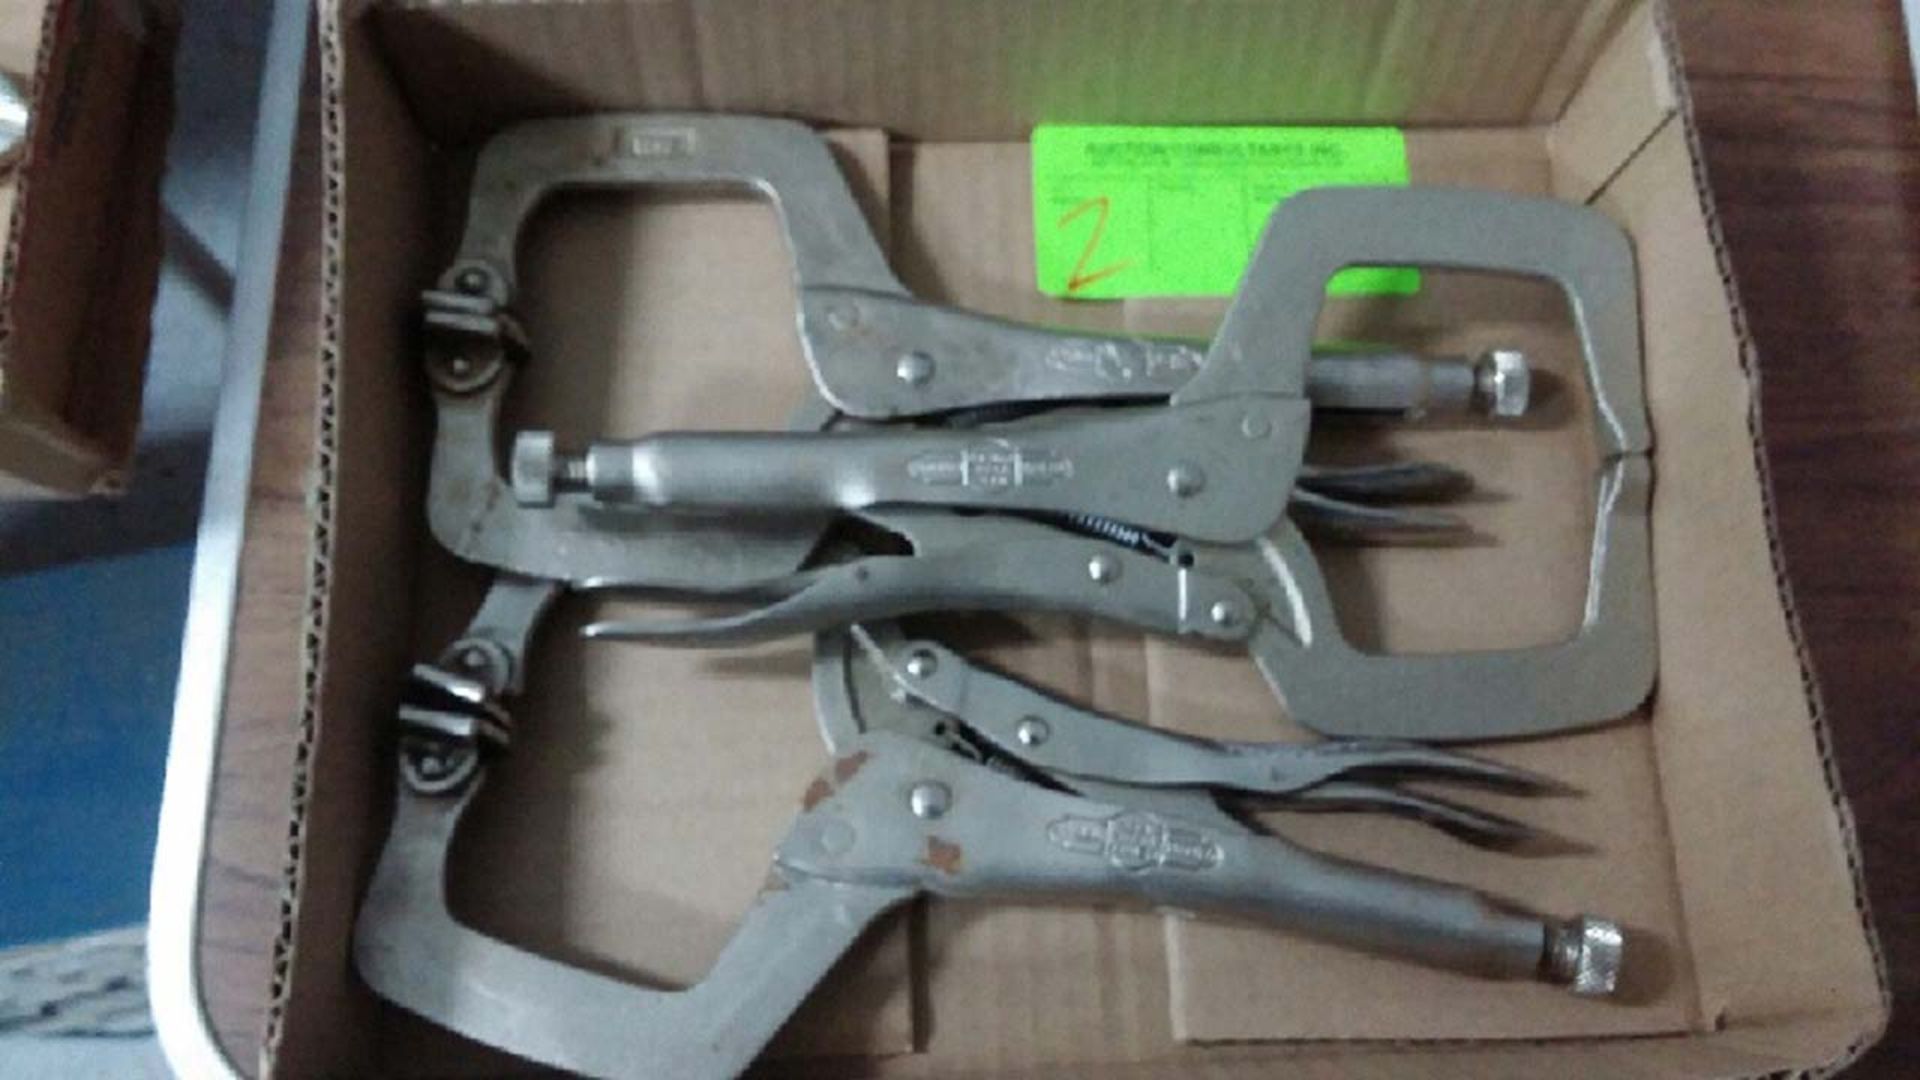 3 Vice Grip Clamps